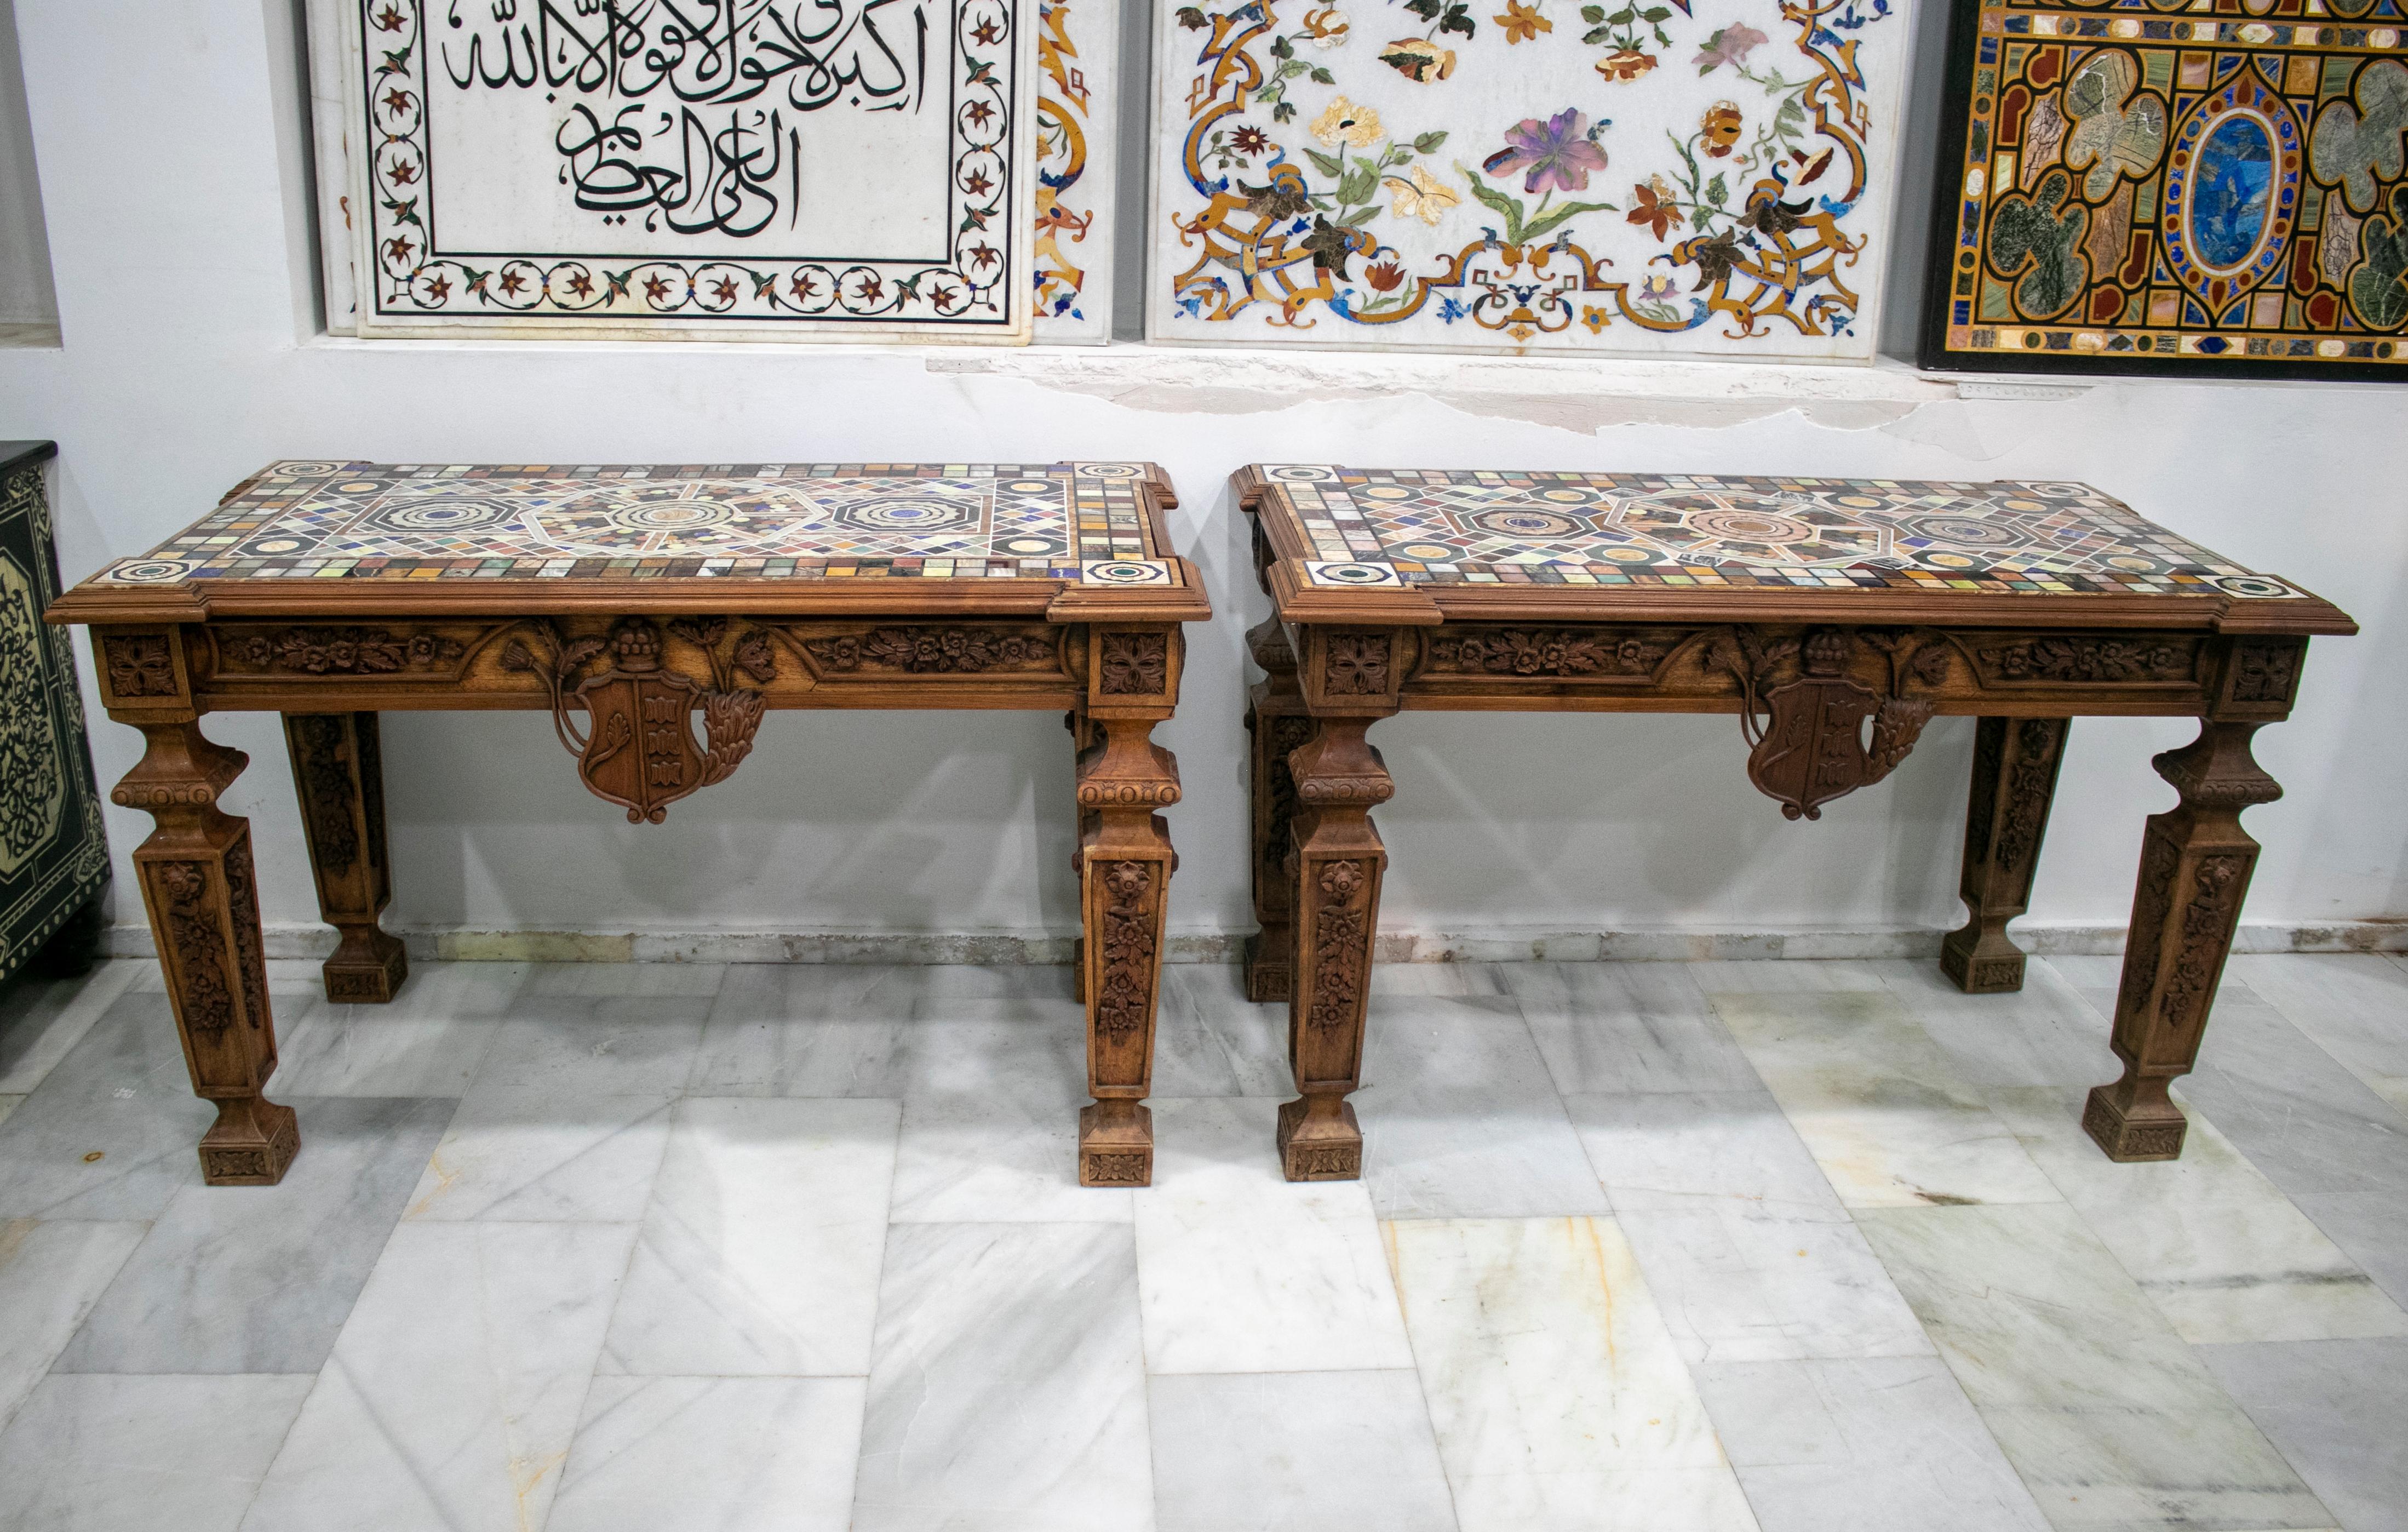 Pair of handmade rectangular pietre dure mosaic top using blue lapis lazuli, ocean jasp, blue amethyst and other semiprecious stones.

Both tops are set in wooden hand carved relieved tables, with crests and vegetable motifs.